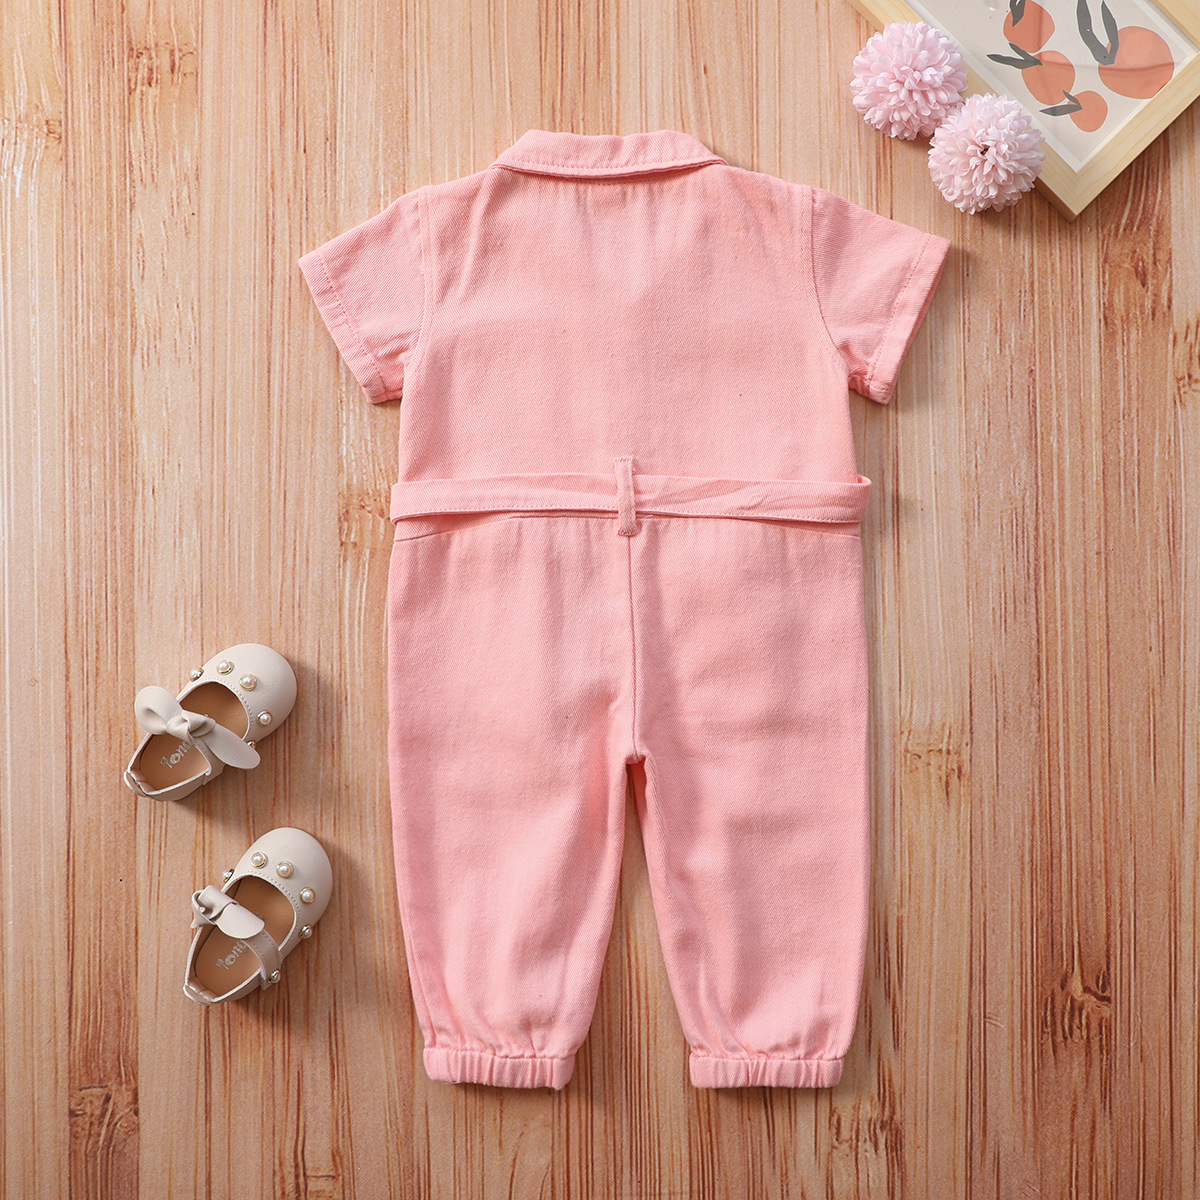 Baby Girl Jumpsuit: Buy Jumpsuit Dress For Baby Girl Online | Babypalms